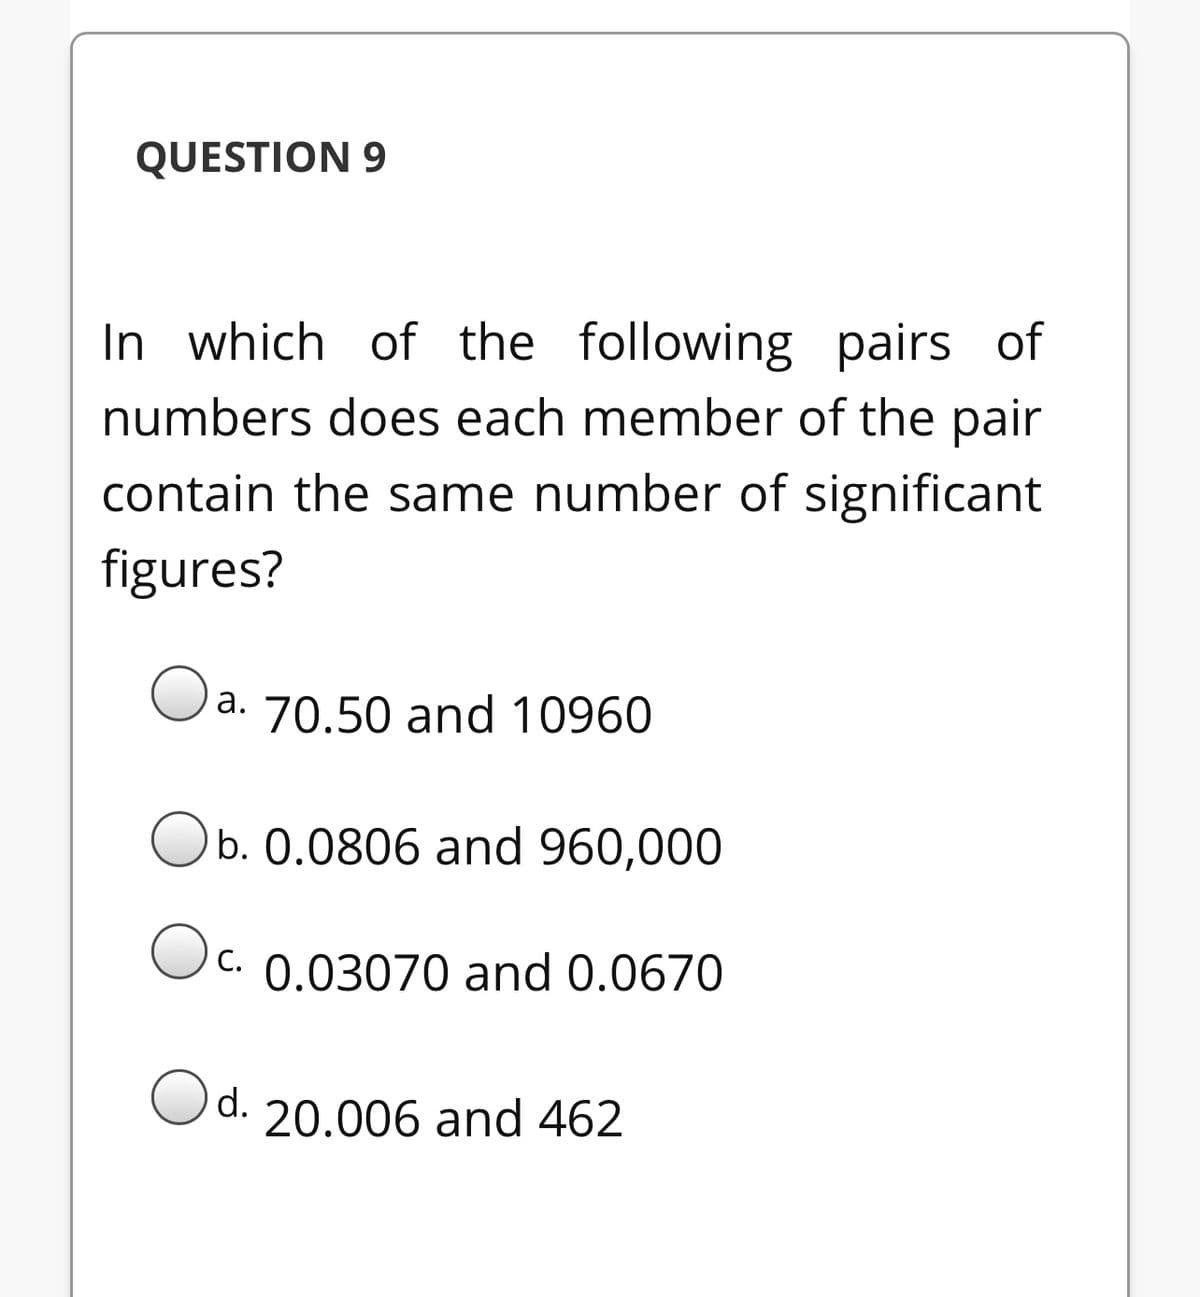 QUESTION 9
In which of the following pairs of
numbers does each member of the pair
contain the same number of significant
figures?
Oa. 70.50 and 10960
Ob. 0.0806 and 960,000
C. 0.03070 and 0.0670
С.
Od.
20.006 and 462
